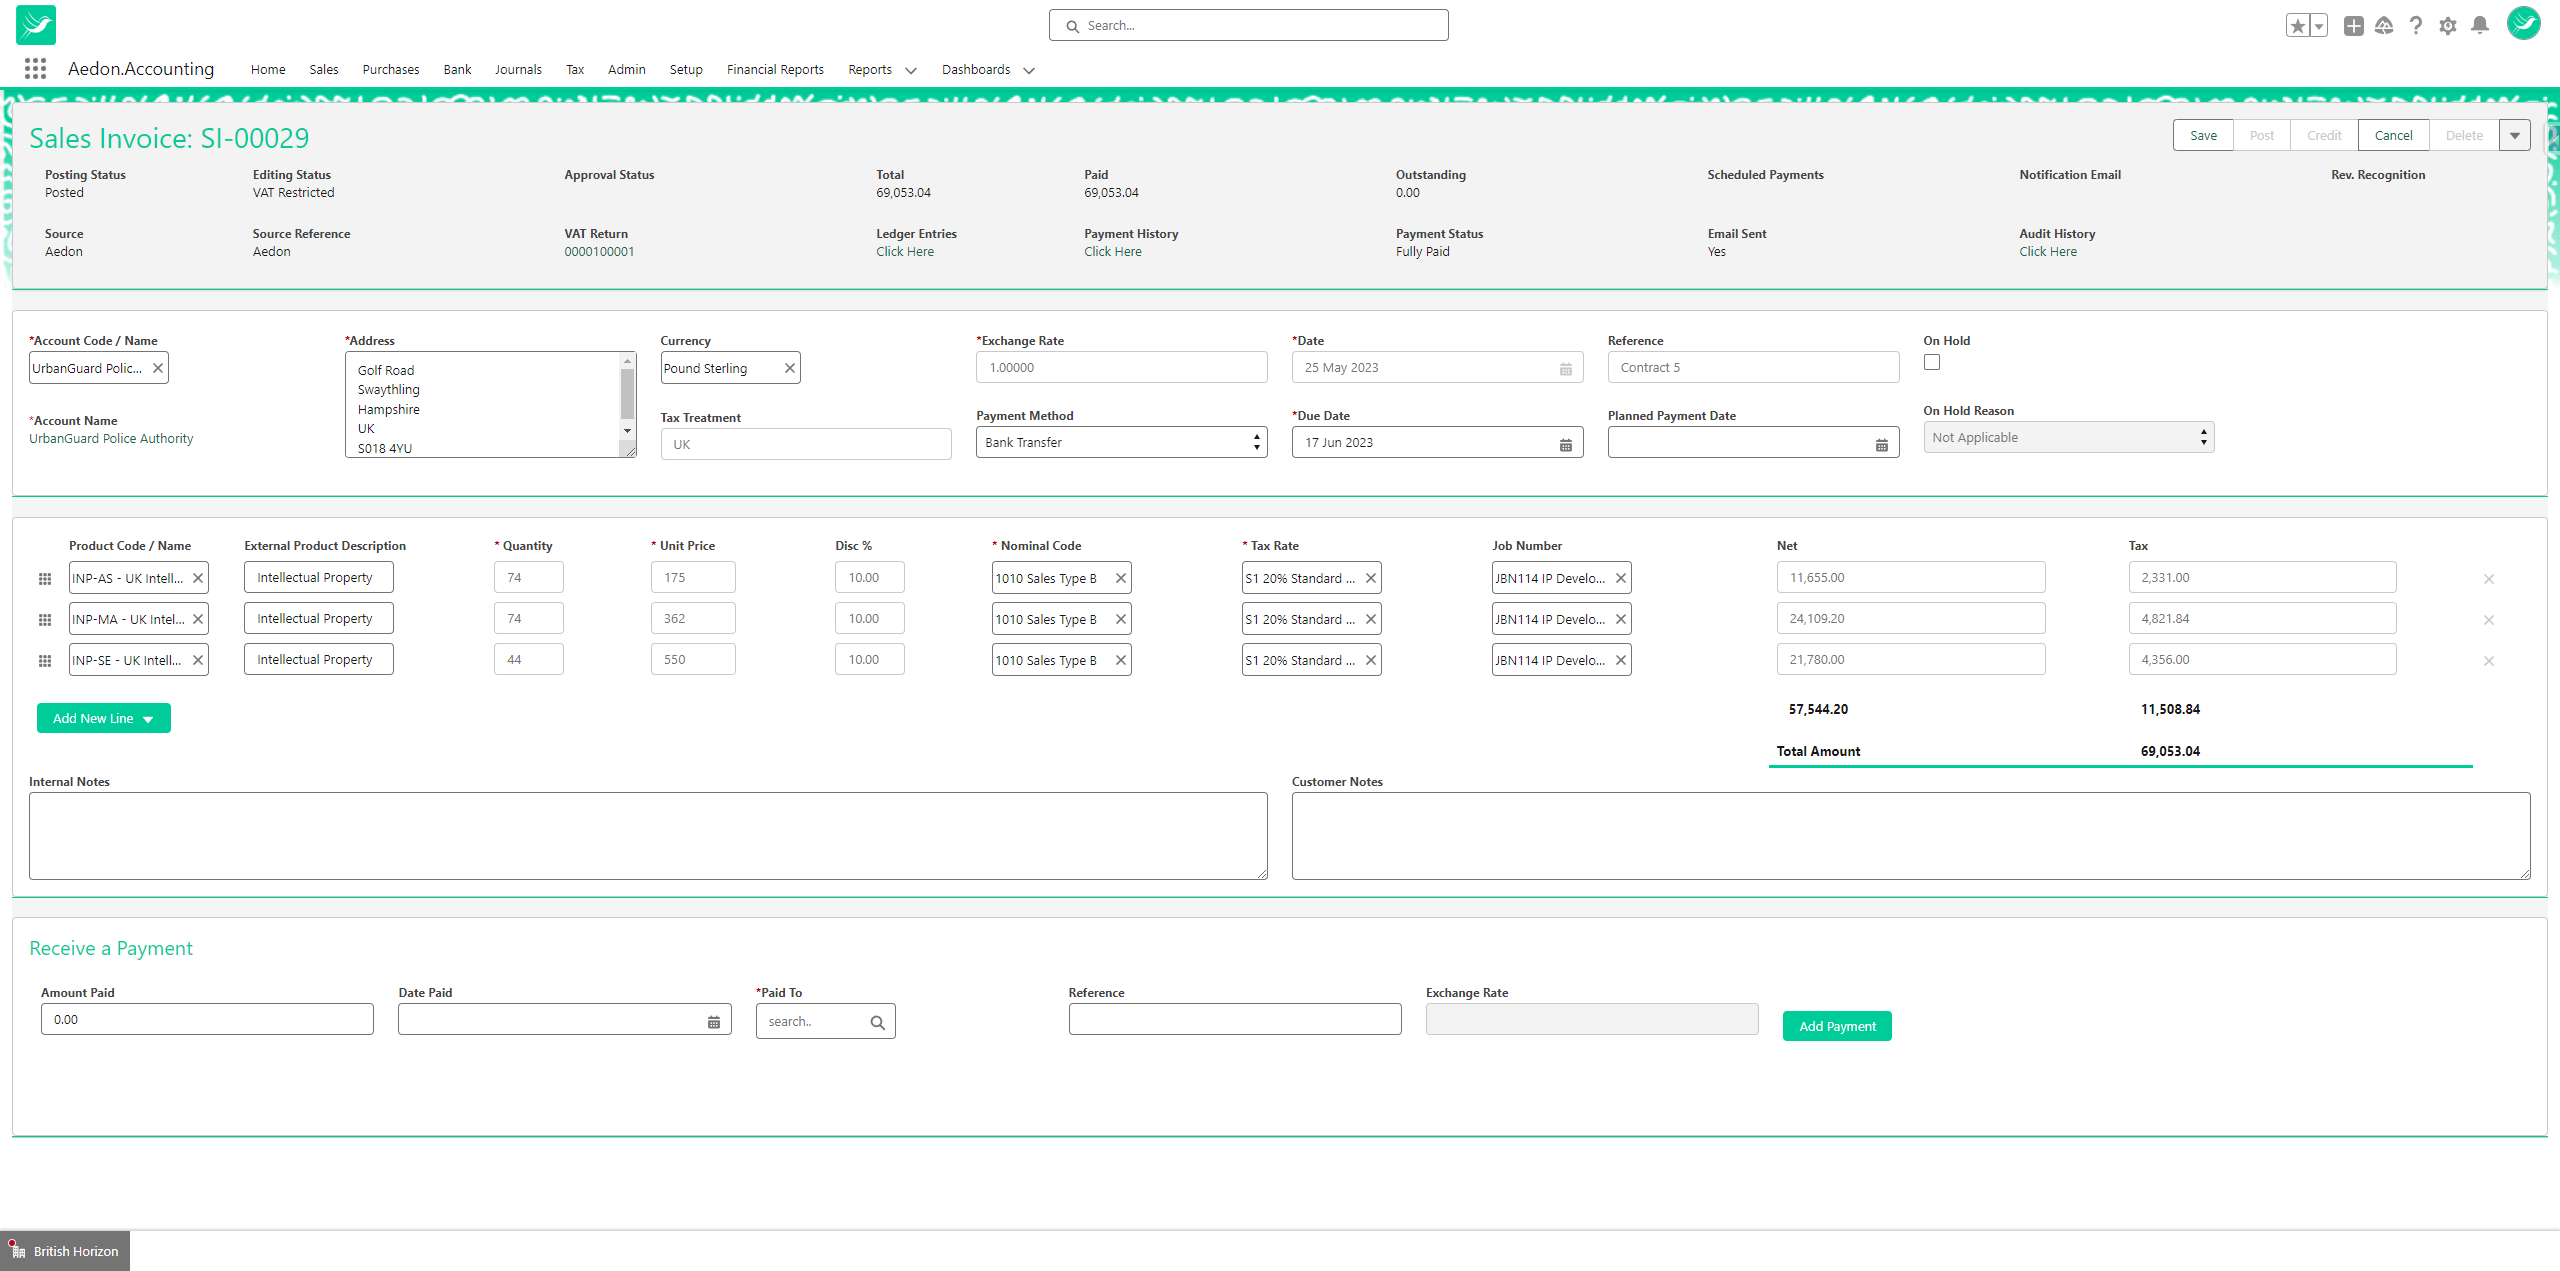 The Sales Invoice is tailored for the finance user with 3 sections:  Status, Header and Transaction Items 